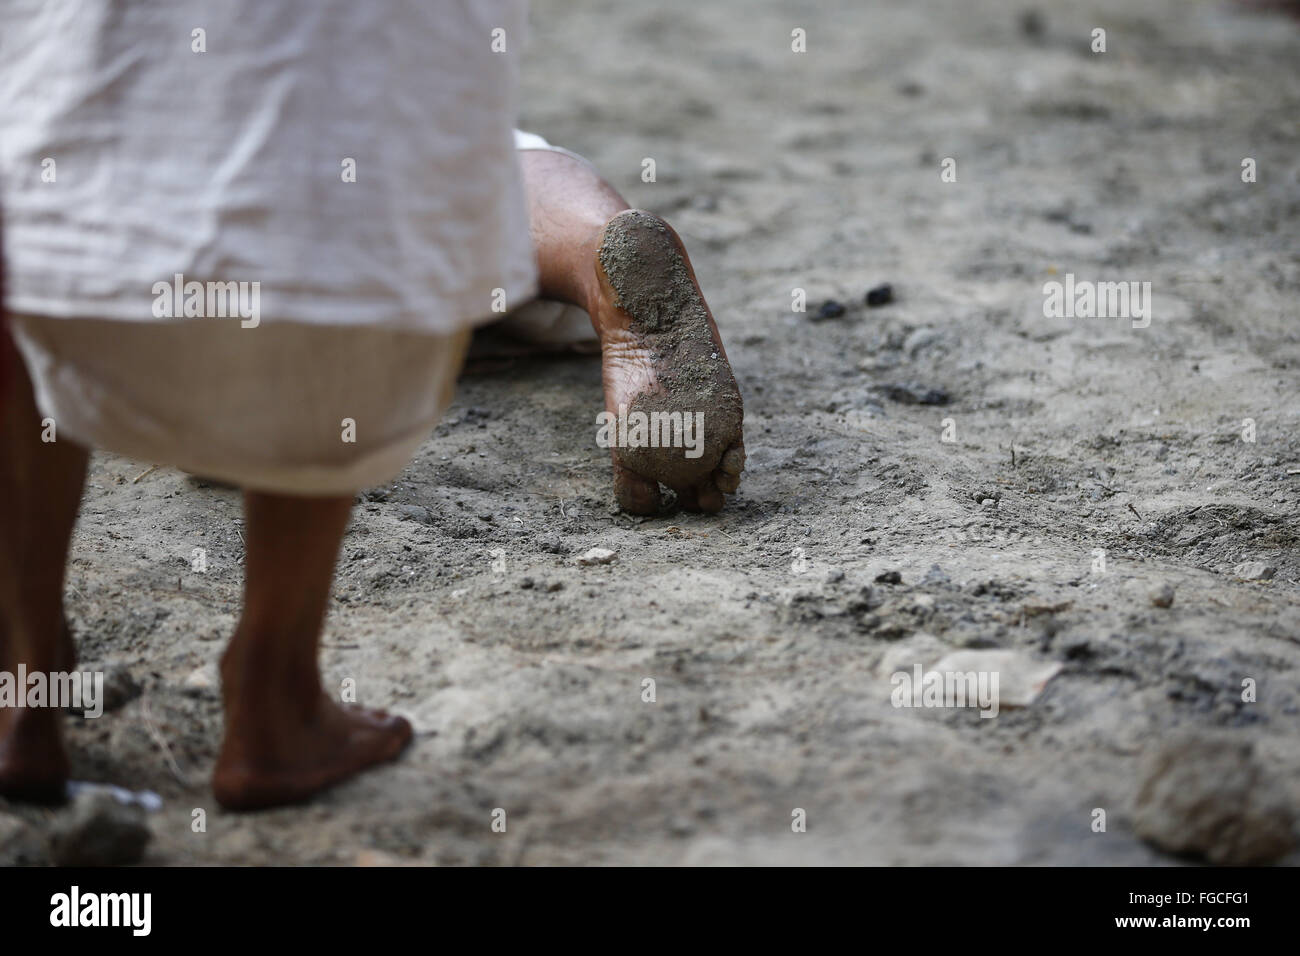 Bhaktapur, Nepal. 19th Feb, 2016. The feet of a Nepalese Hindu devotee man is seen as he reels to offer prayers during the month-long Swasthani Bratakatha festival, devoted to goddess Shree Swasthani in the premise of an ancient Hindu temple of Changu Narayan in Bhaktapur, Nepal on Friday, February 19, 16. Men devotees recite Holy Scripture and women pray for wellbeing of their spouses throughout the month-long fast via travelling barefooted to holy shrines for worship. Credit:  Skanda Gautam/ZUMA Wire/Alamy Live News Stock Photo